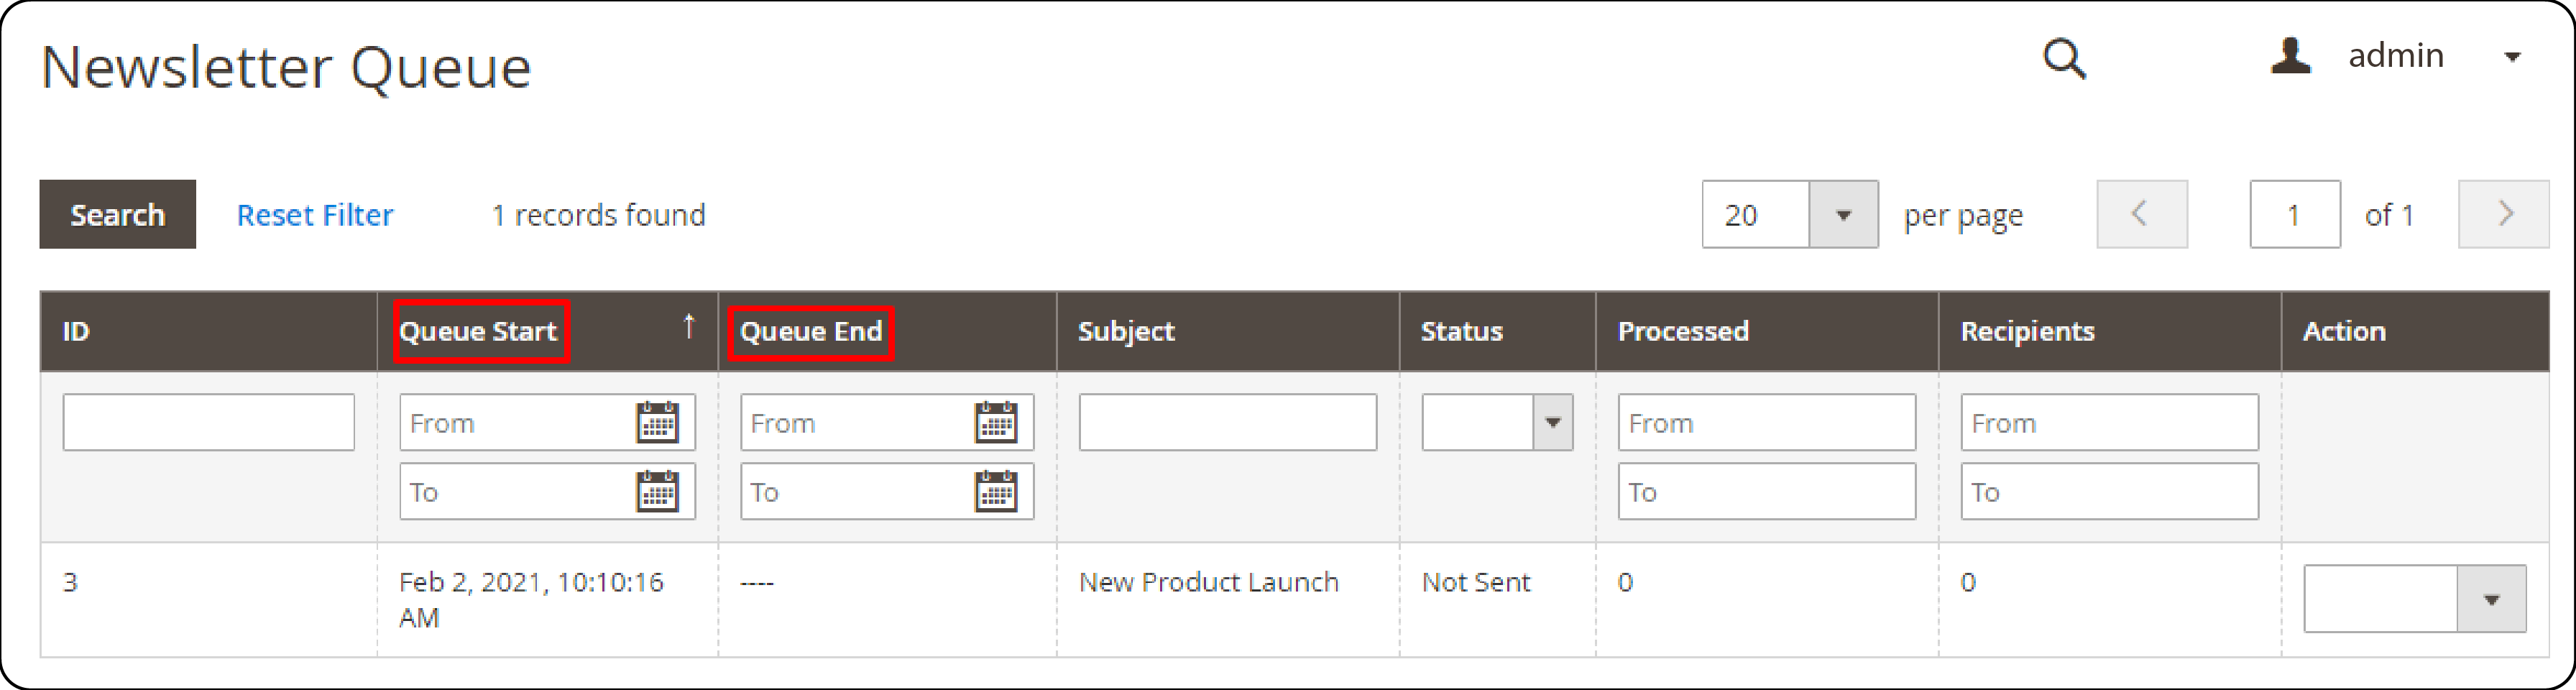 Setting queue start and end dates for a Magento 2 newsletter campaign